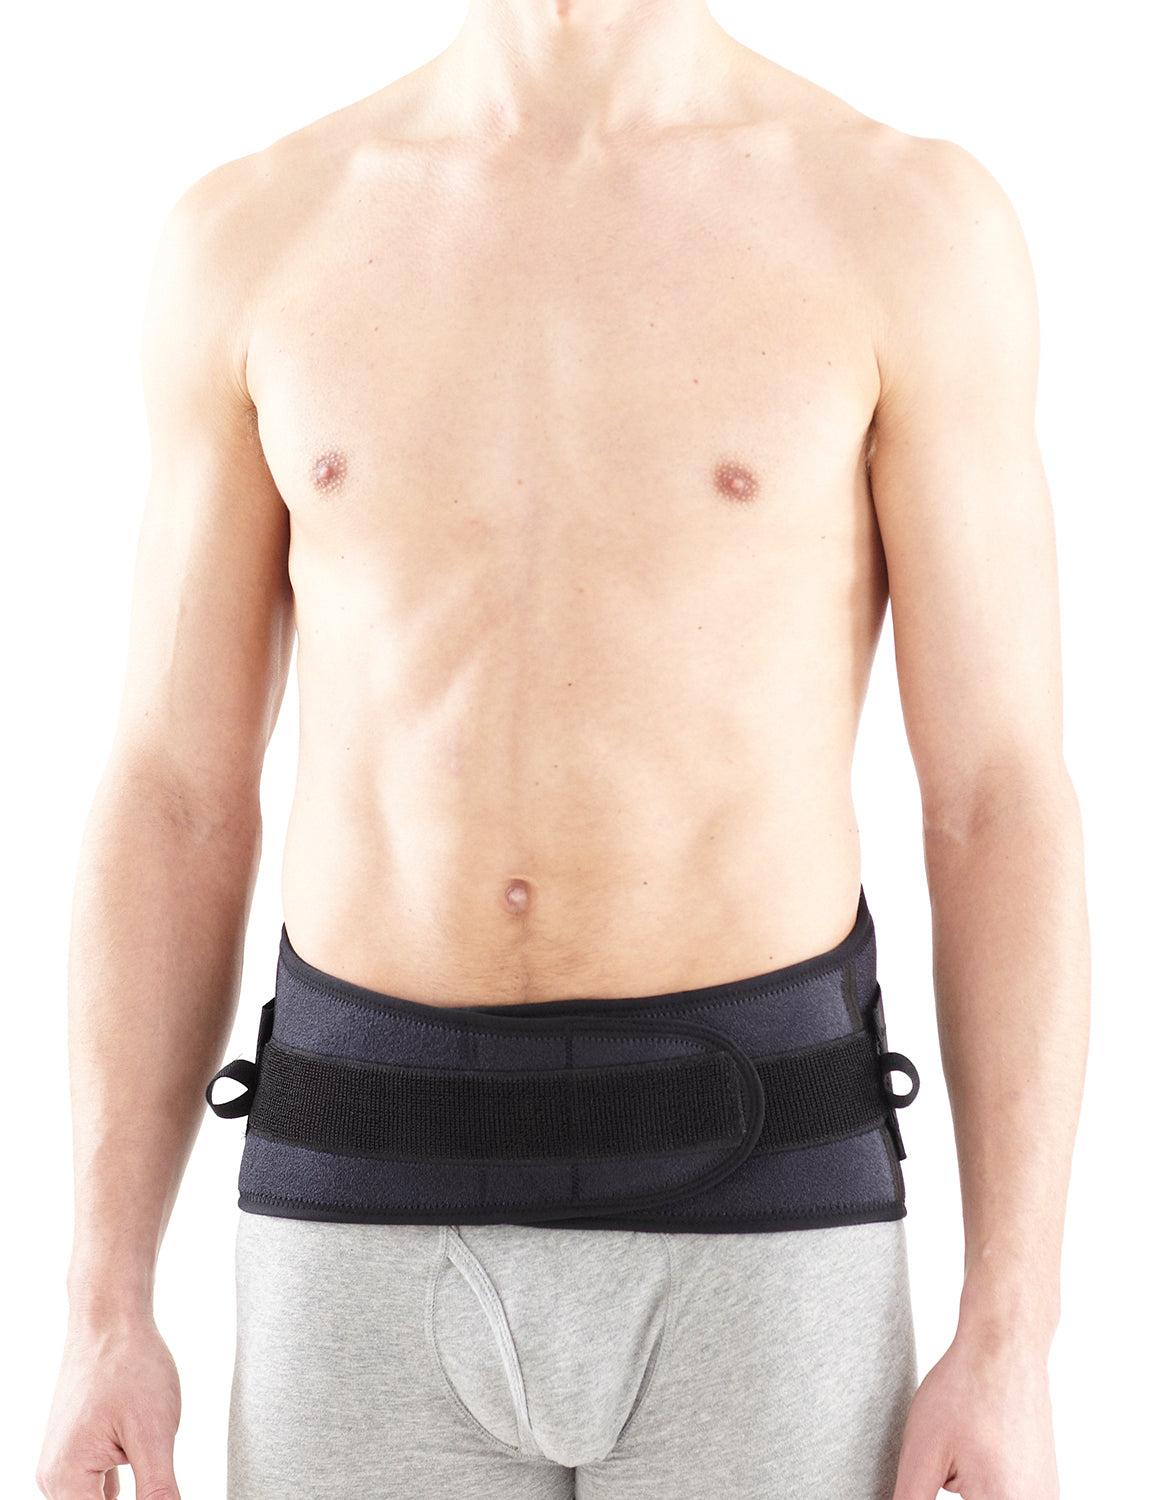 Lumbosacral Support, Spinal Disc Rehab Brace, 2-Pull Side, Velcro Fron -  Home Medical Supply